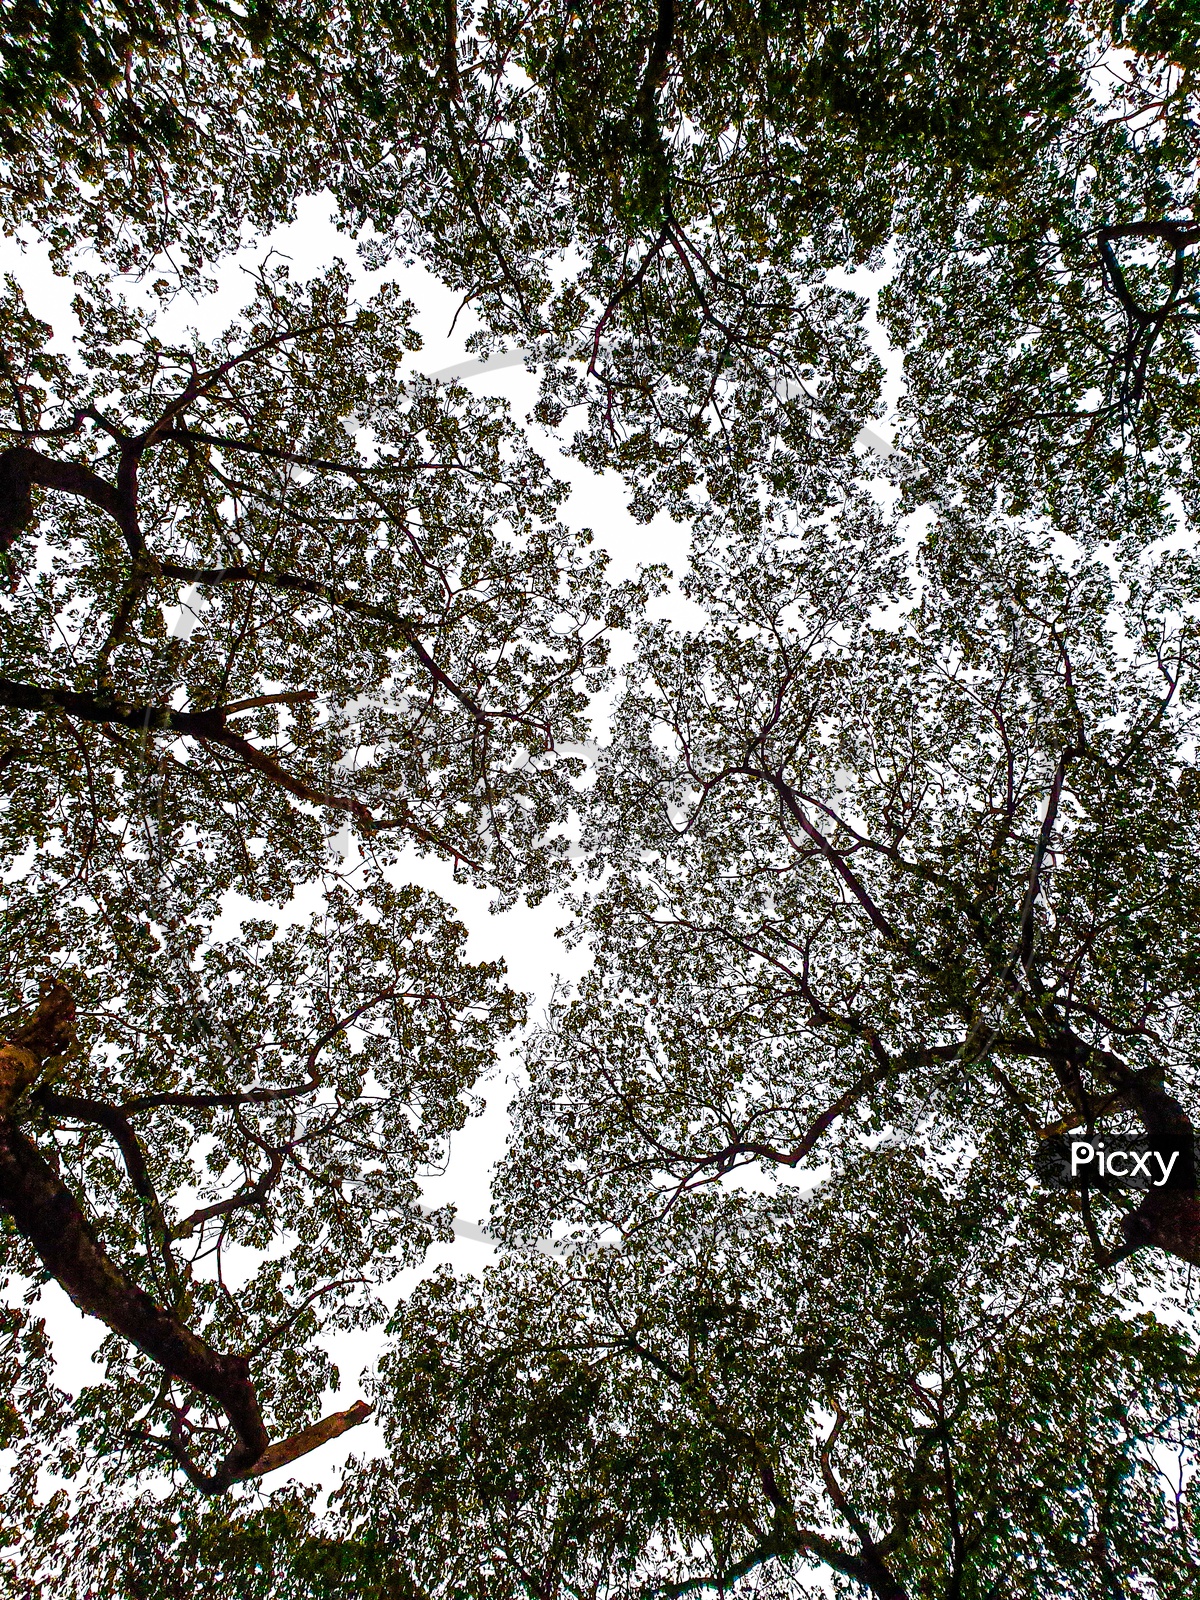 Canopy Of tree Branches With Bright Sky